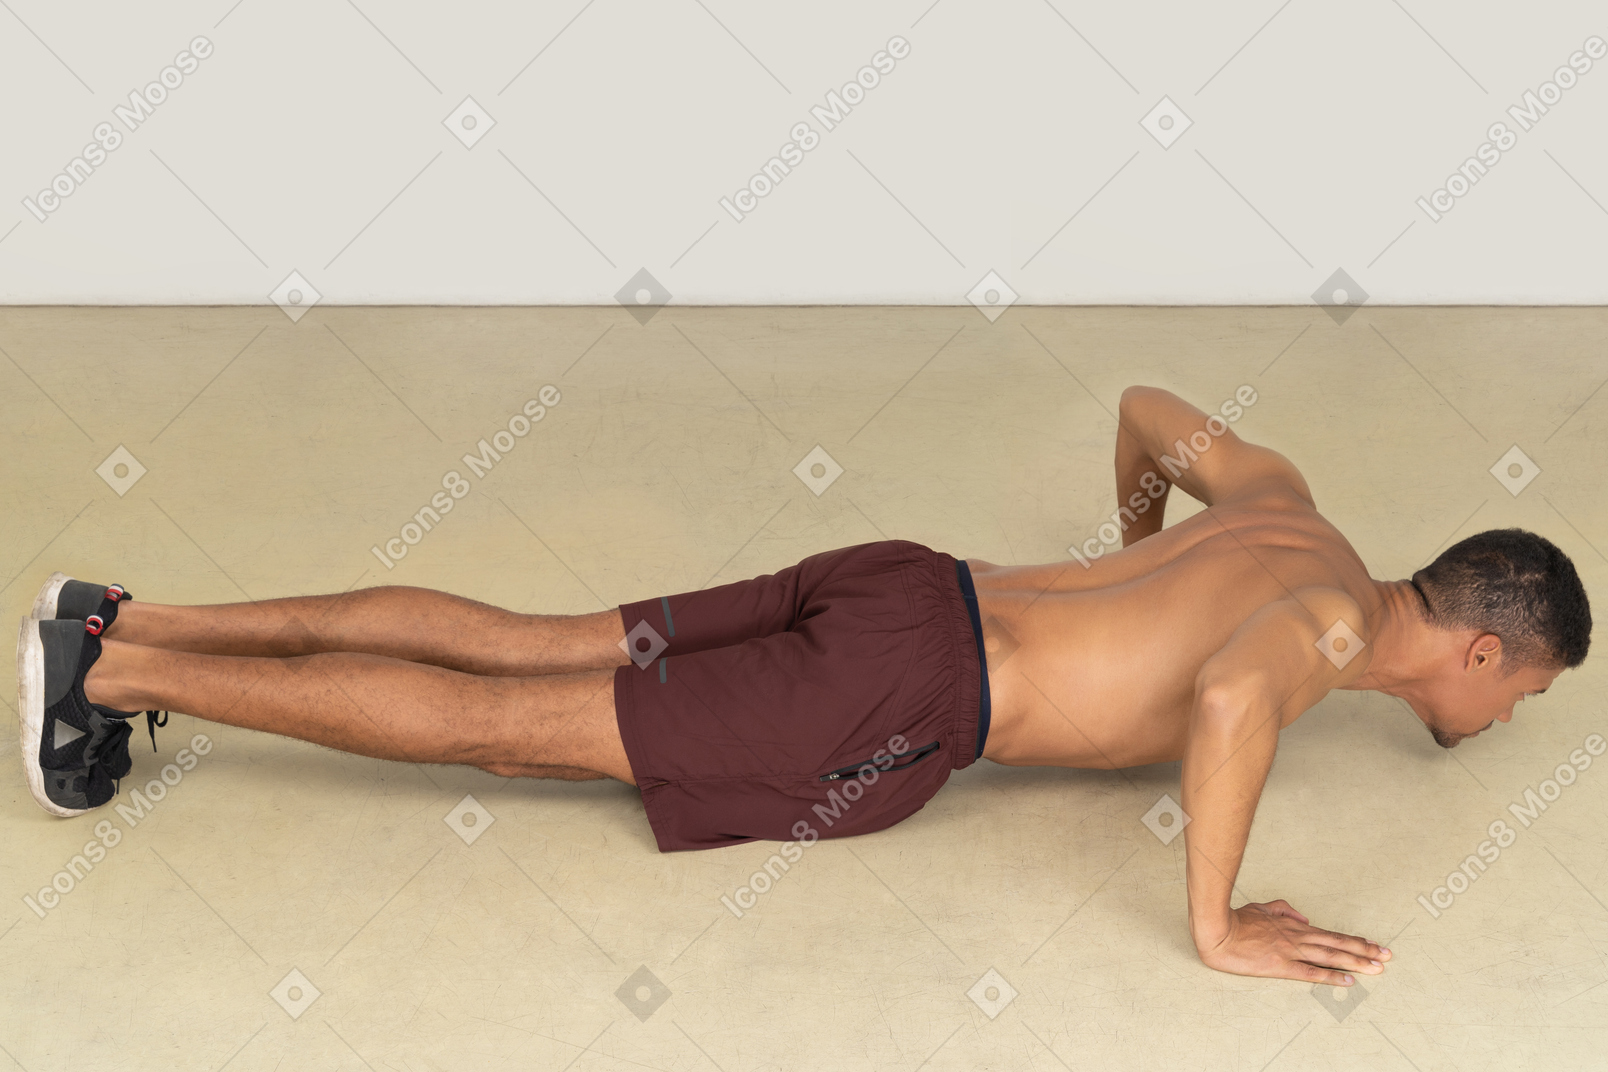 A side view of the beautiful tall guy doing some exercises on the floor